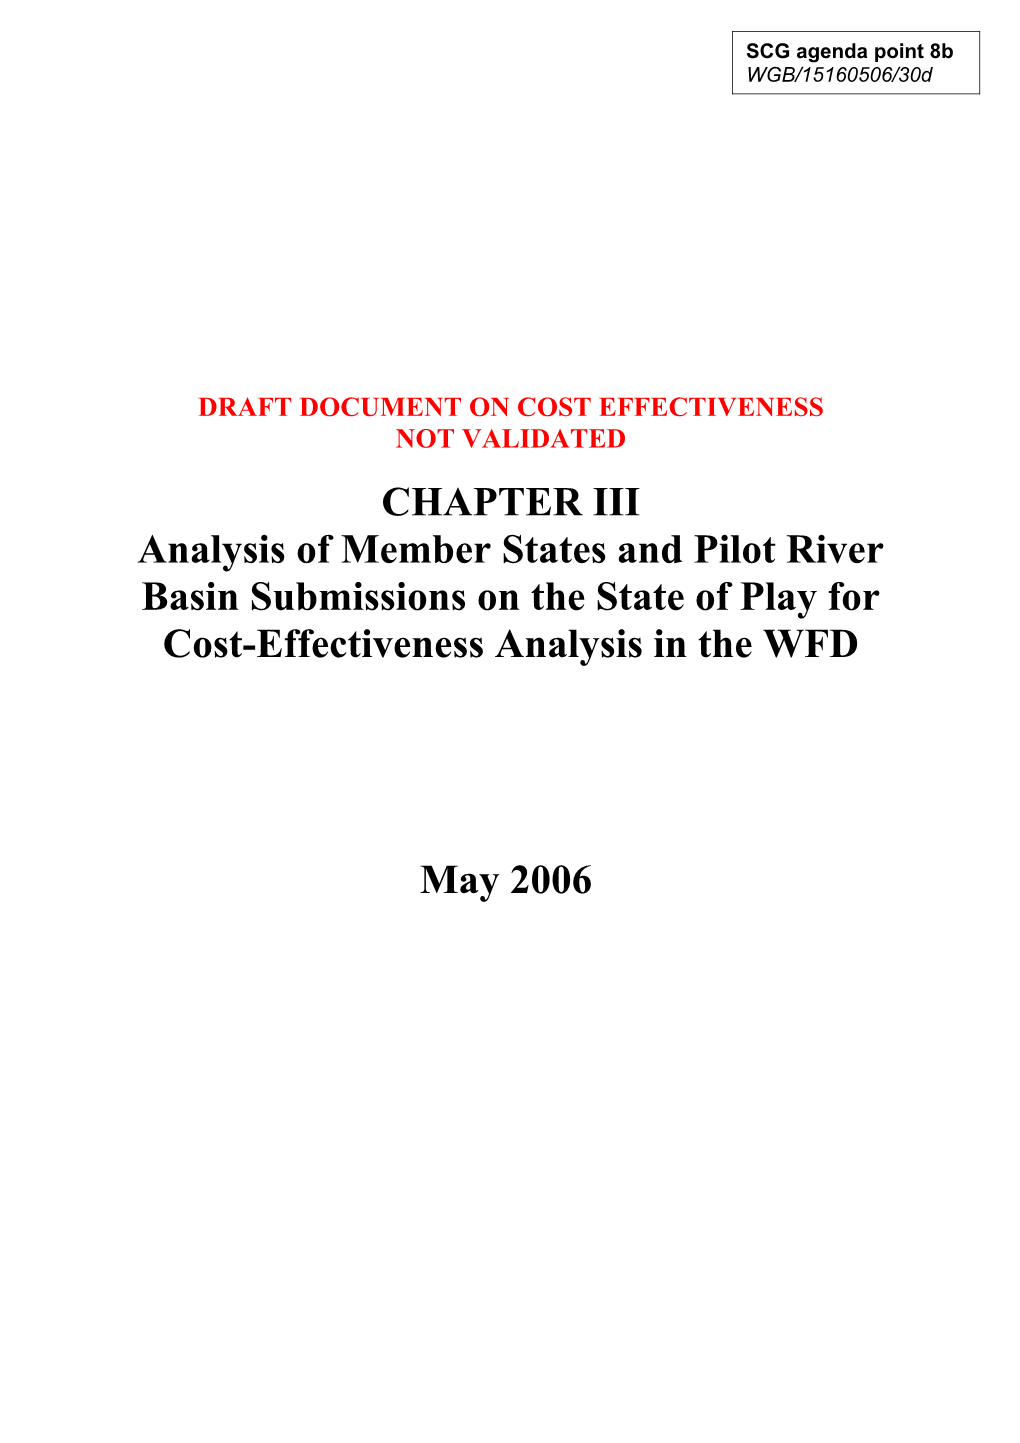 Draft Document on Cost Effectiveness